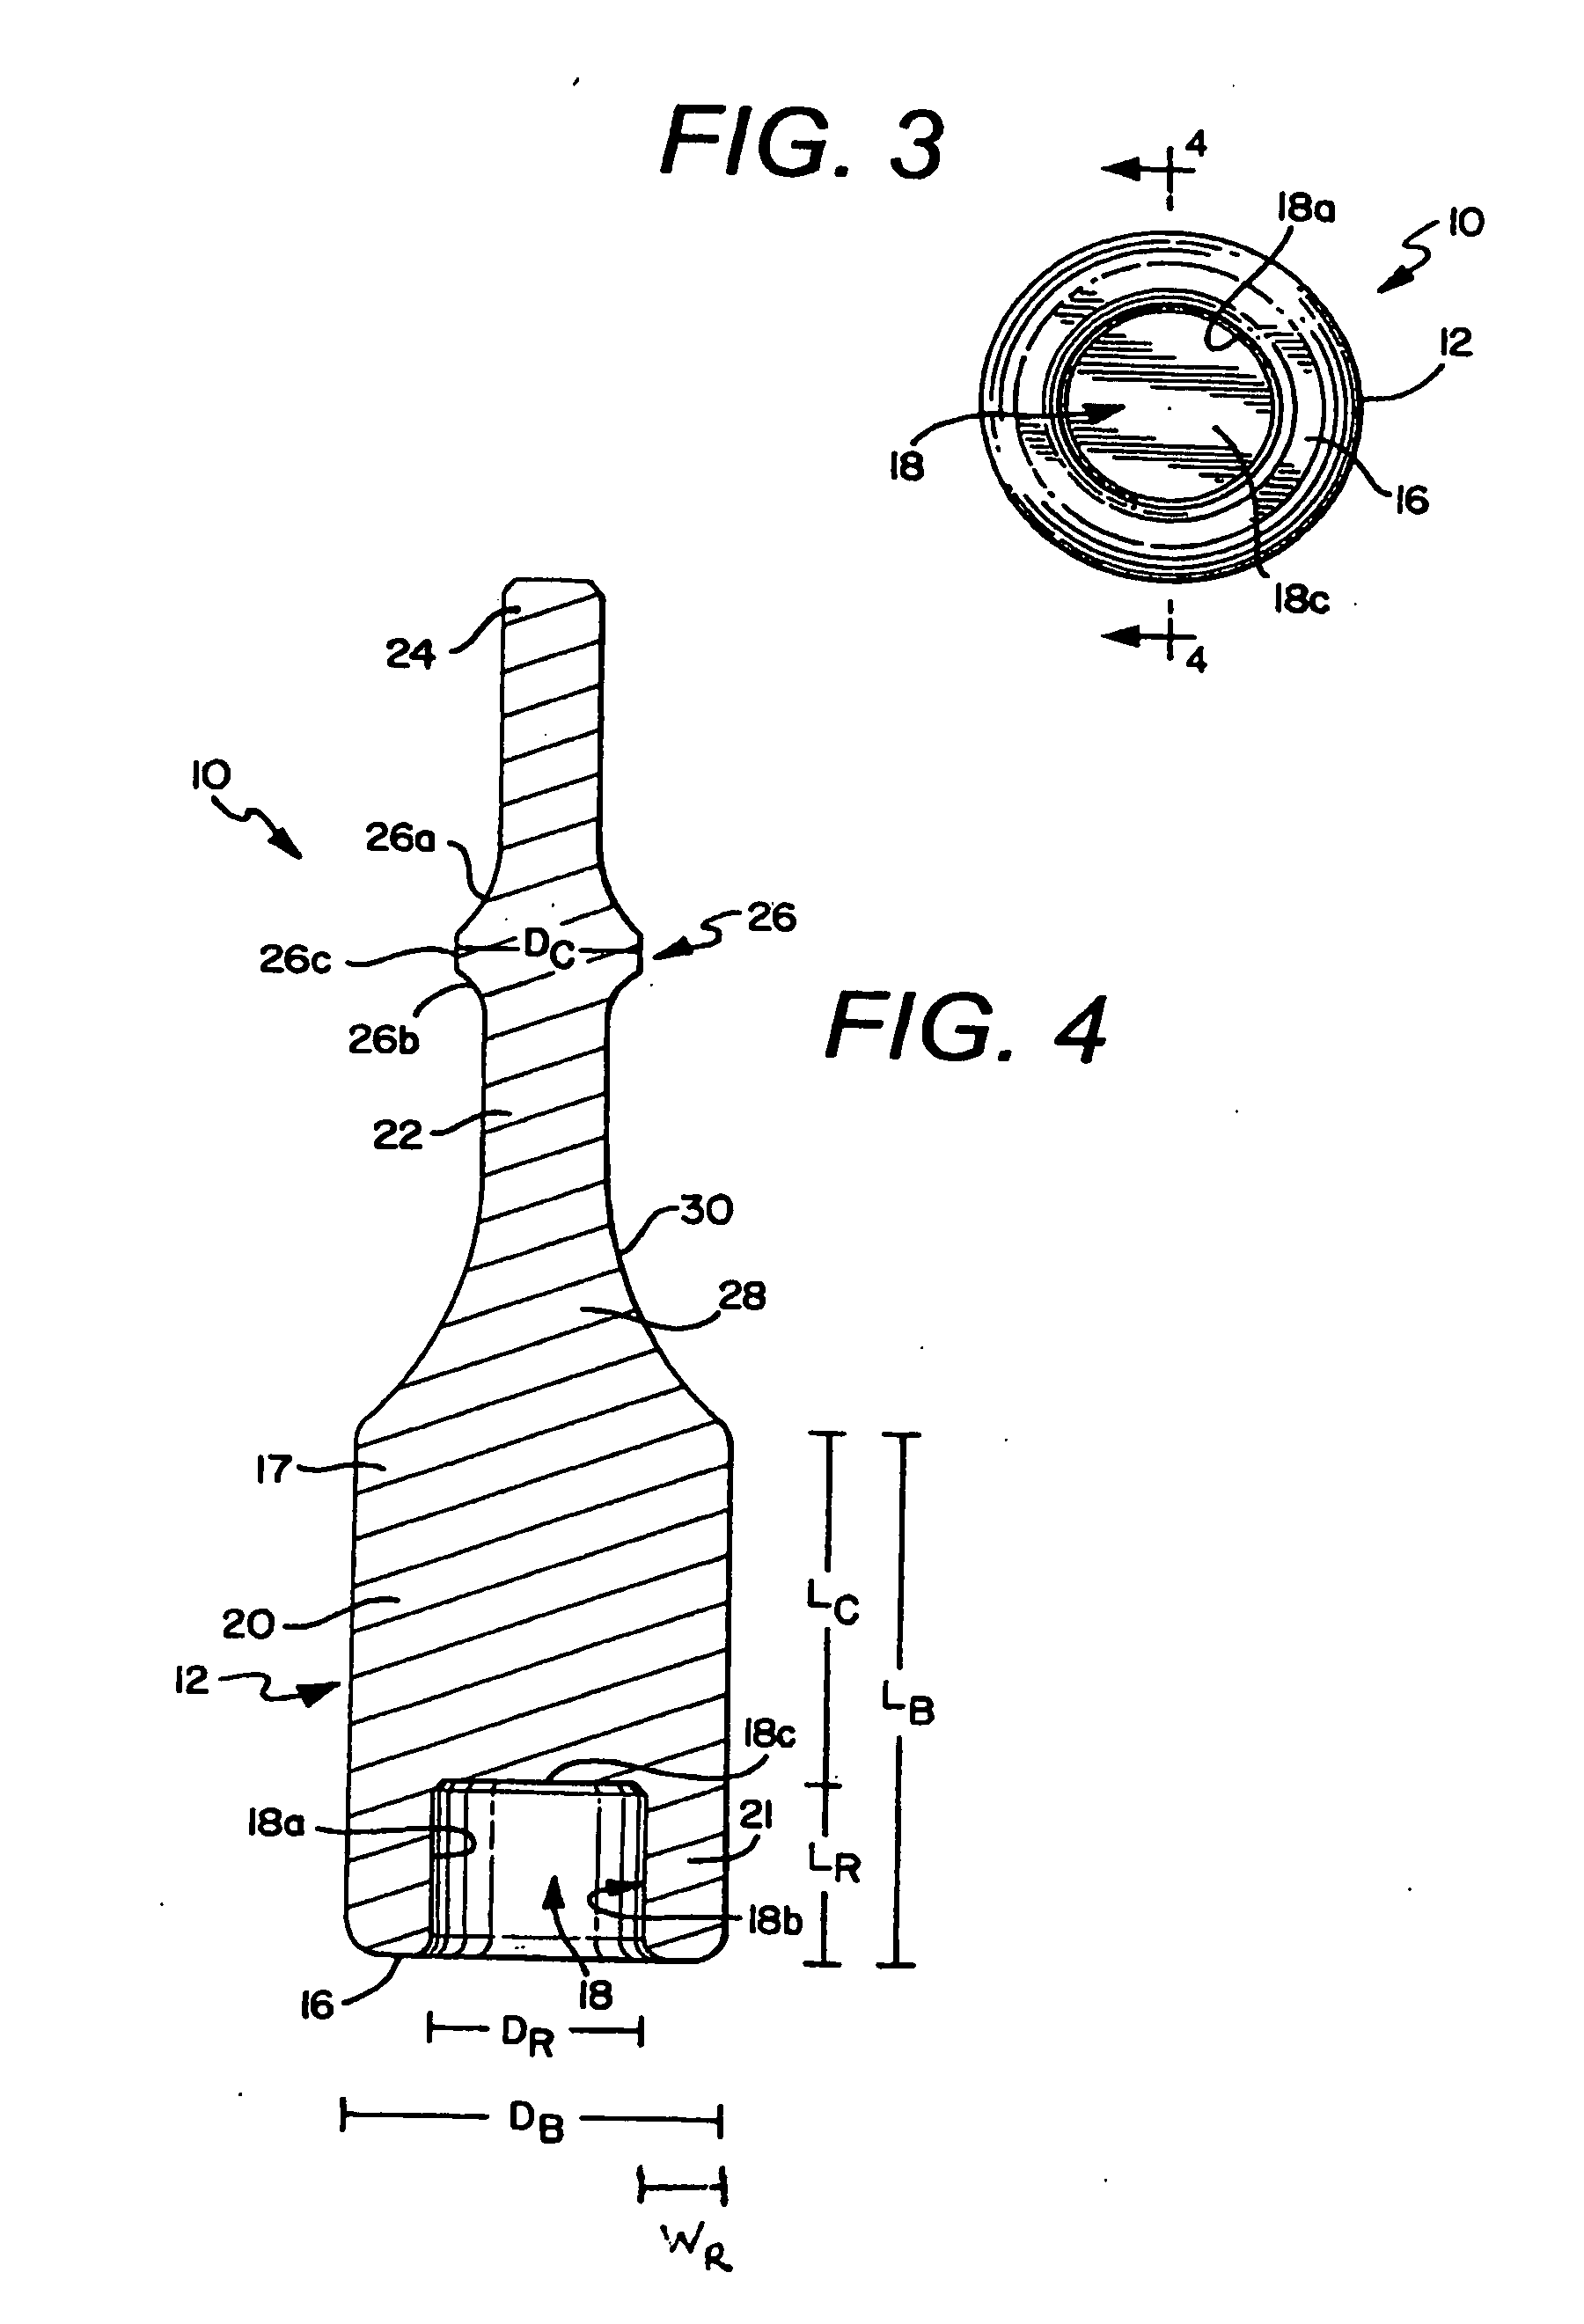 Tool bit for driving an elongated fastener